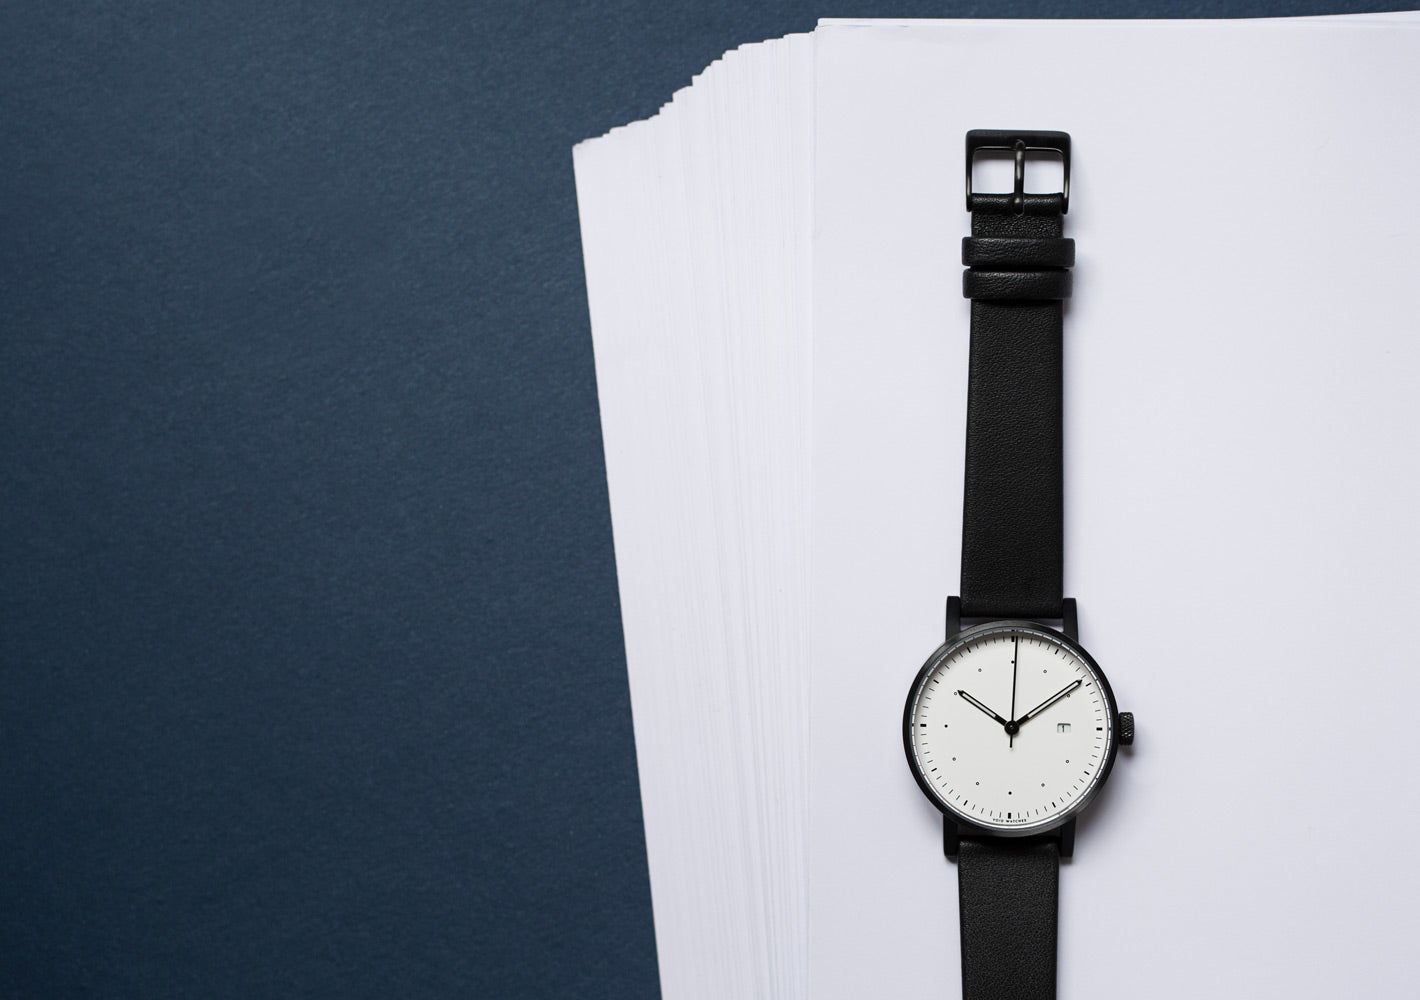 The Limited Edition Dezeen watch by VOID Watches. Designed by David Ericsson and Patrick Kim Gustafson. V03D-Dezeen.